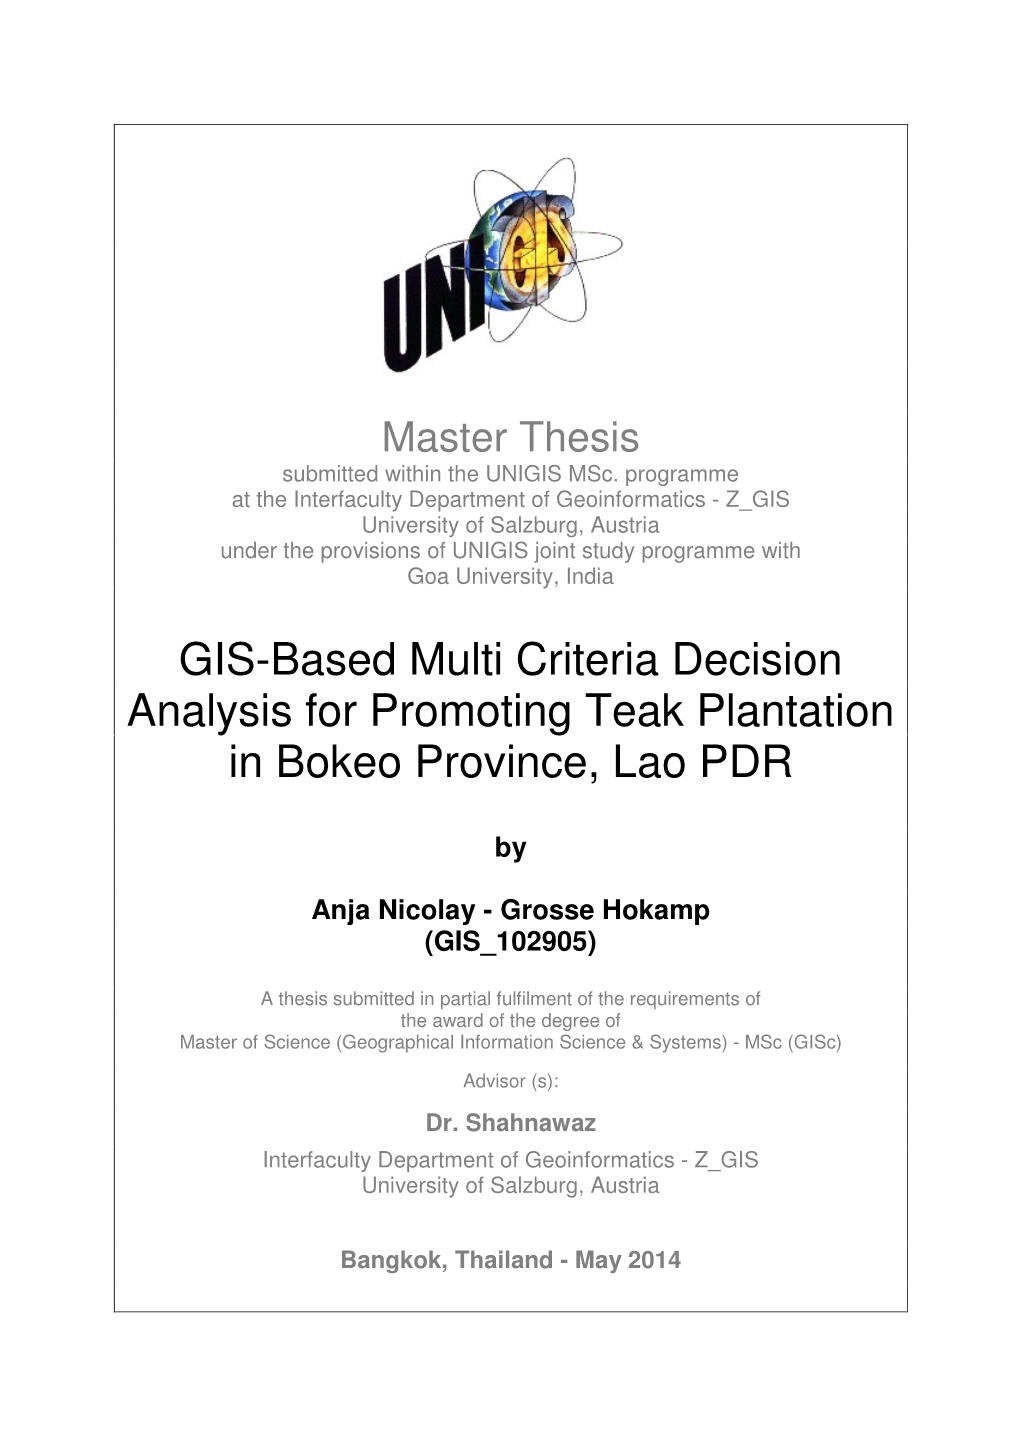 GIS-Based Multi Criteria Decision Analysis for Promoting Teak Plantation in Bokeo Province, Lao PDR